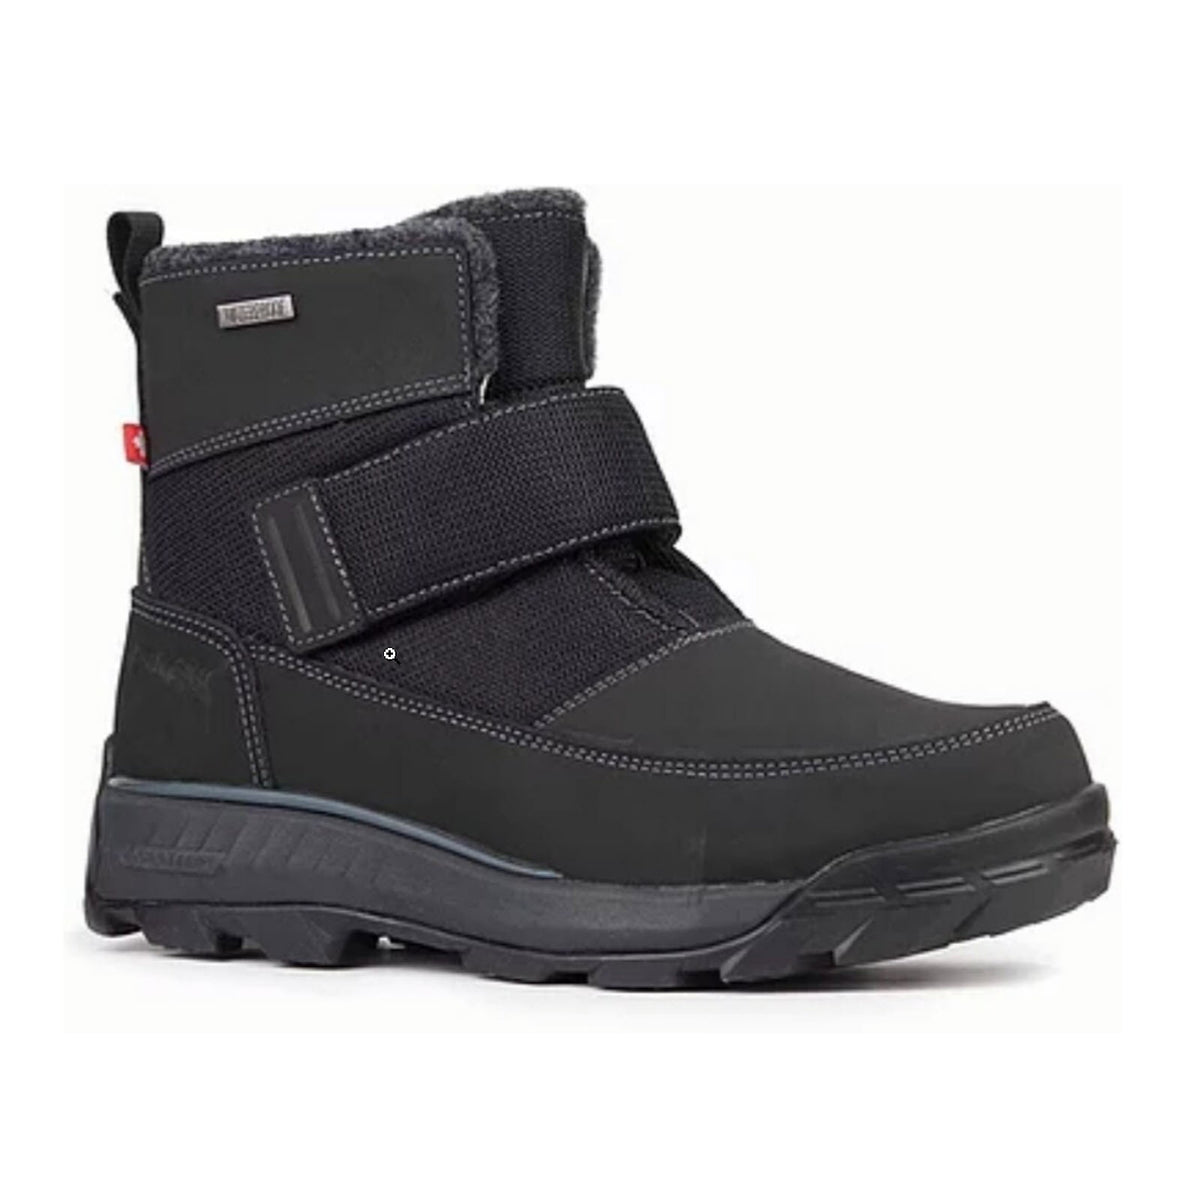 NexGrip Ice Jacob 3.0 Black men&#39;s winter boot with velcro straps and a thick rubber sole, isolated on a white background.